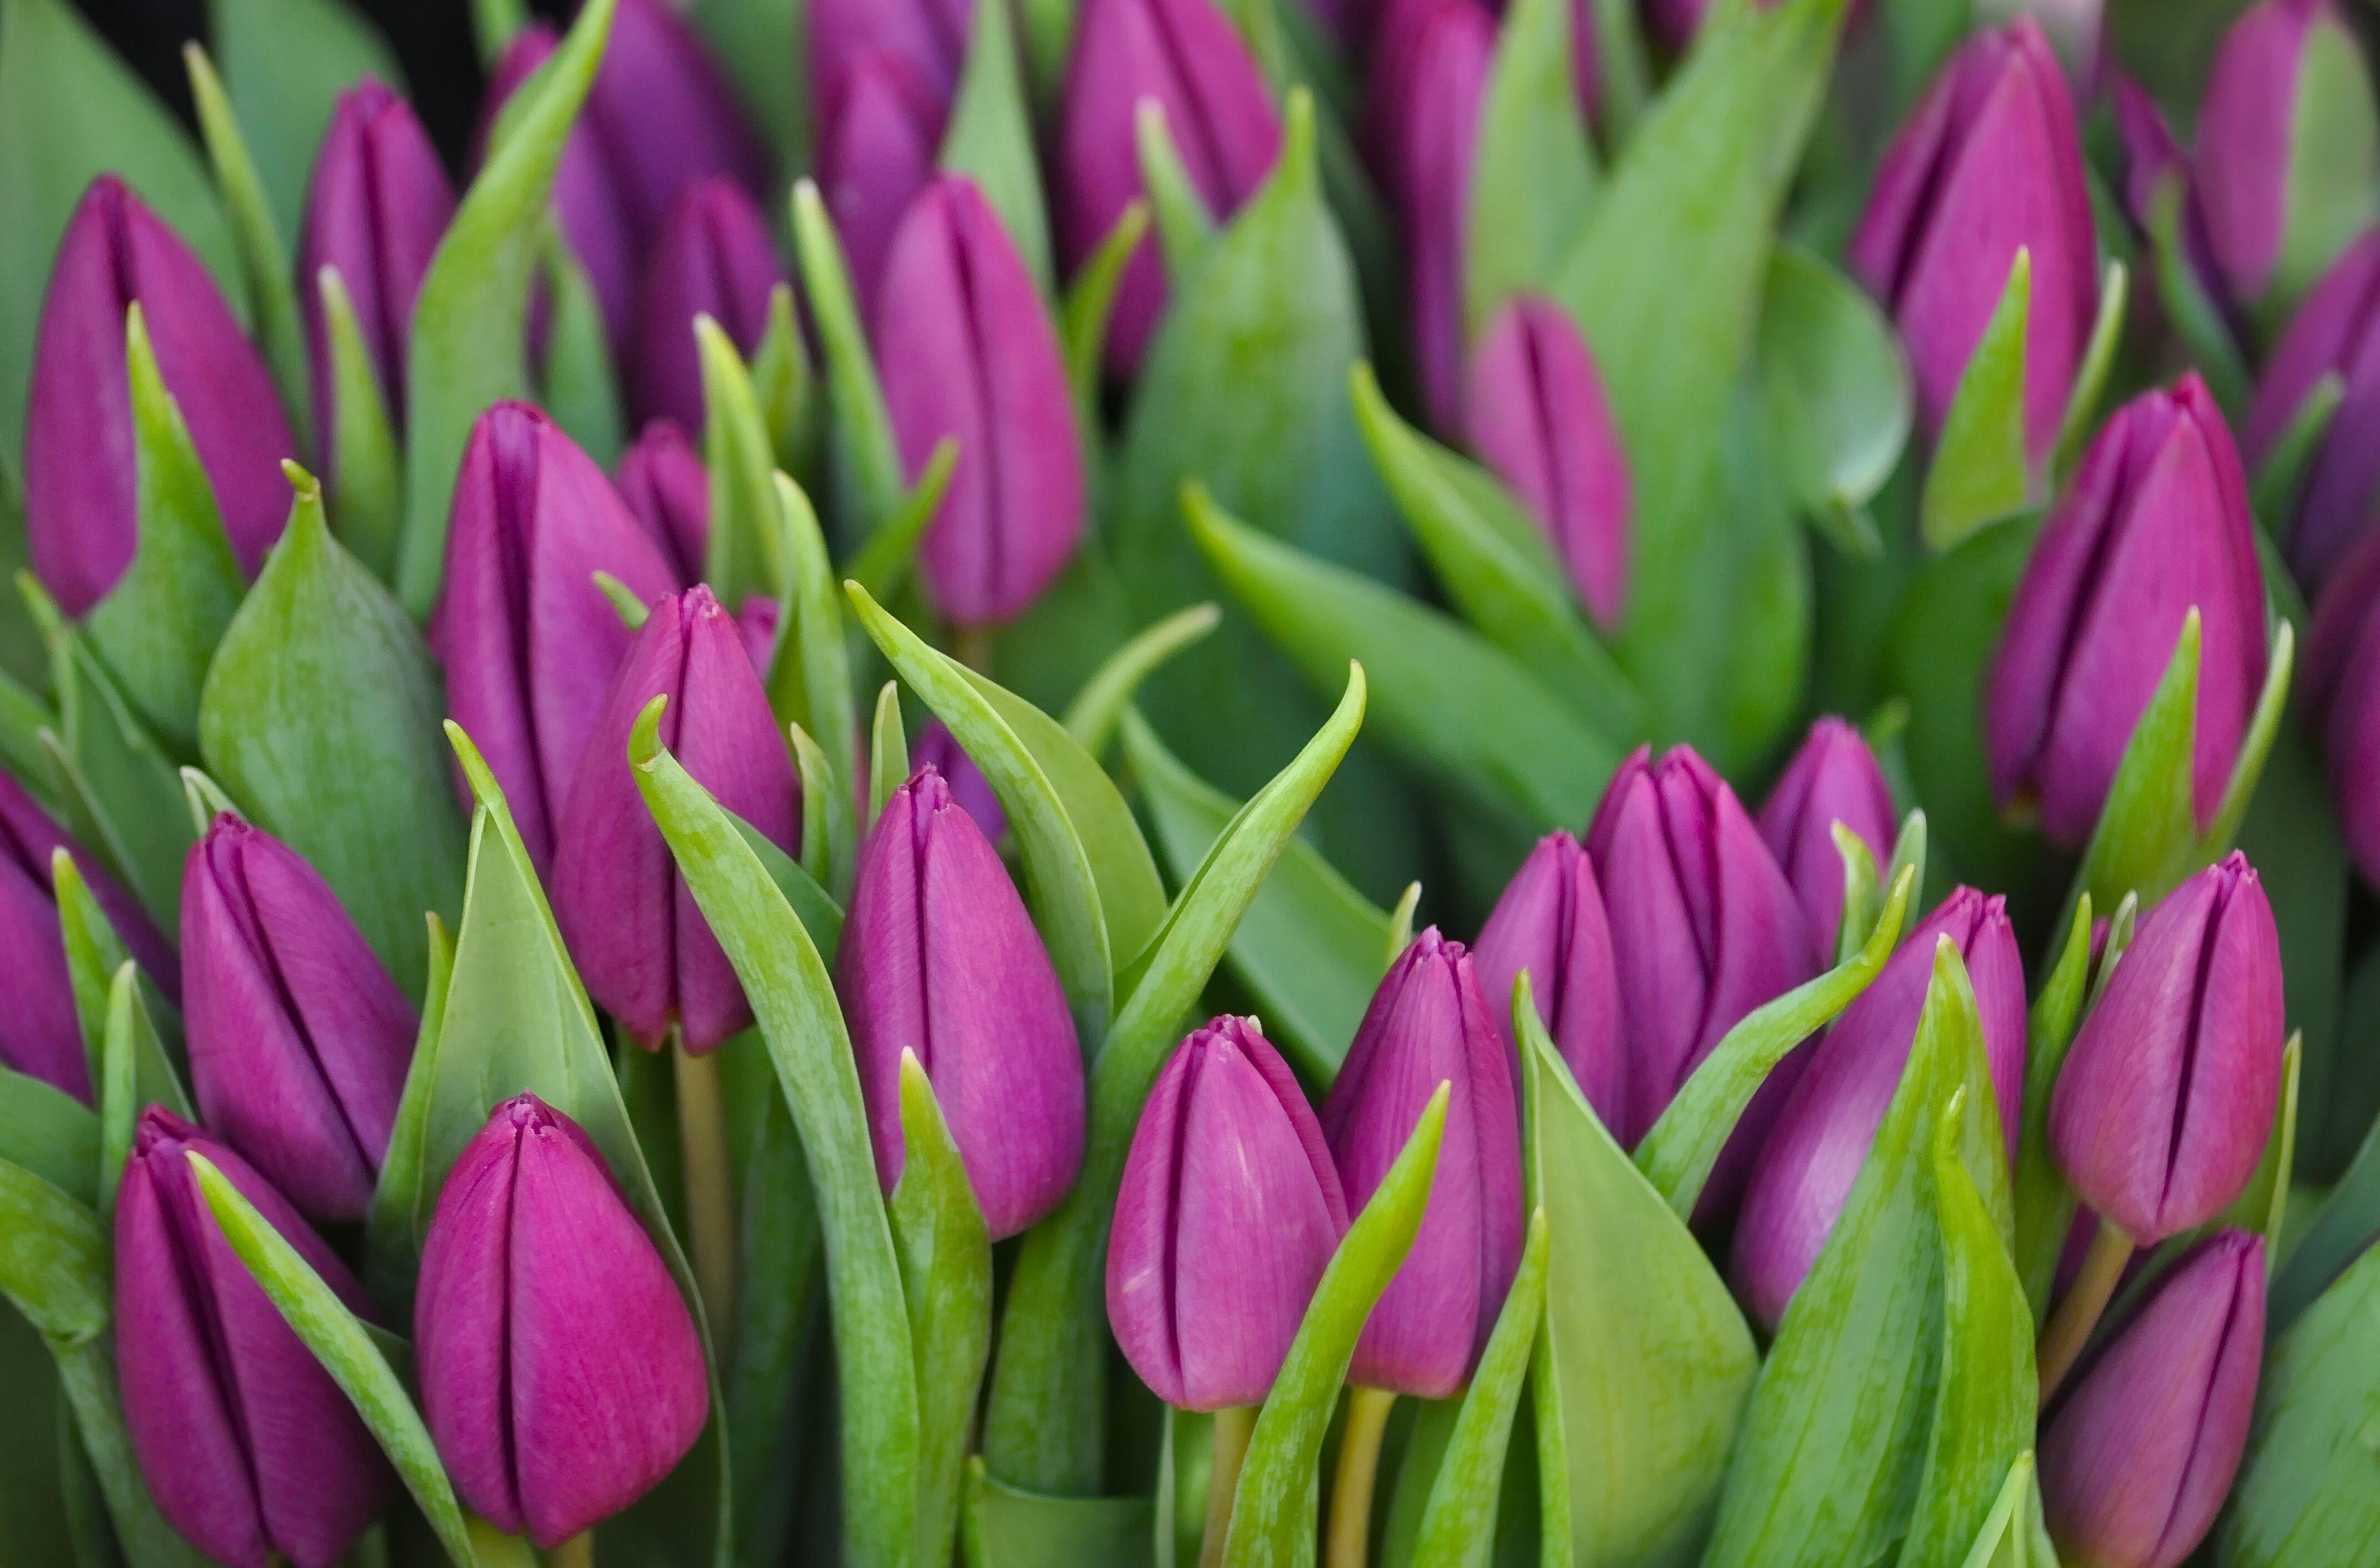 greens, bouquet, buds, lilac, flowers, tulips, purple